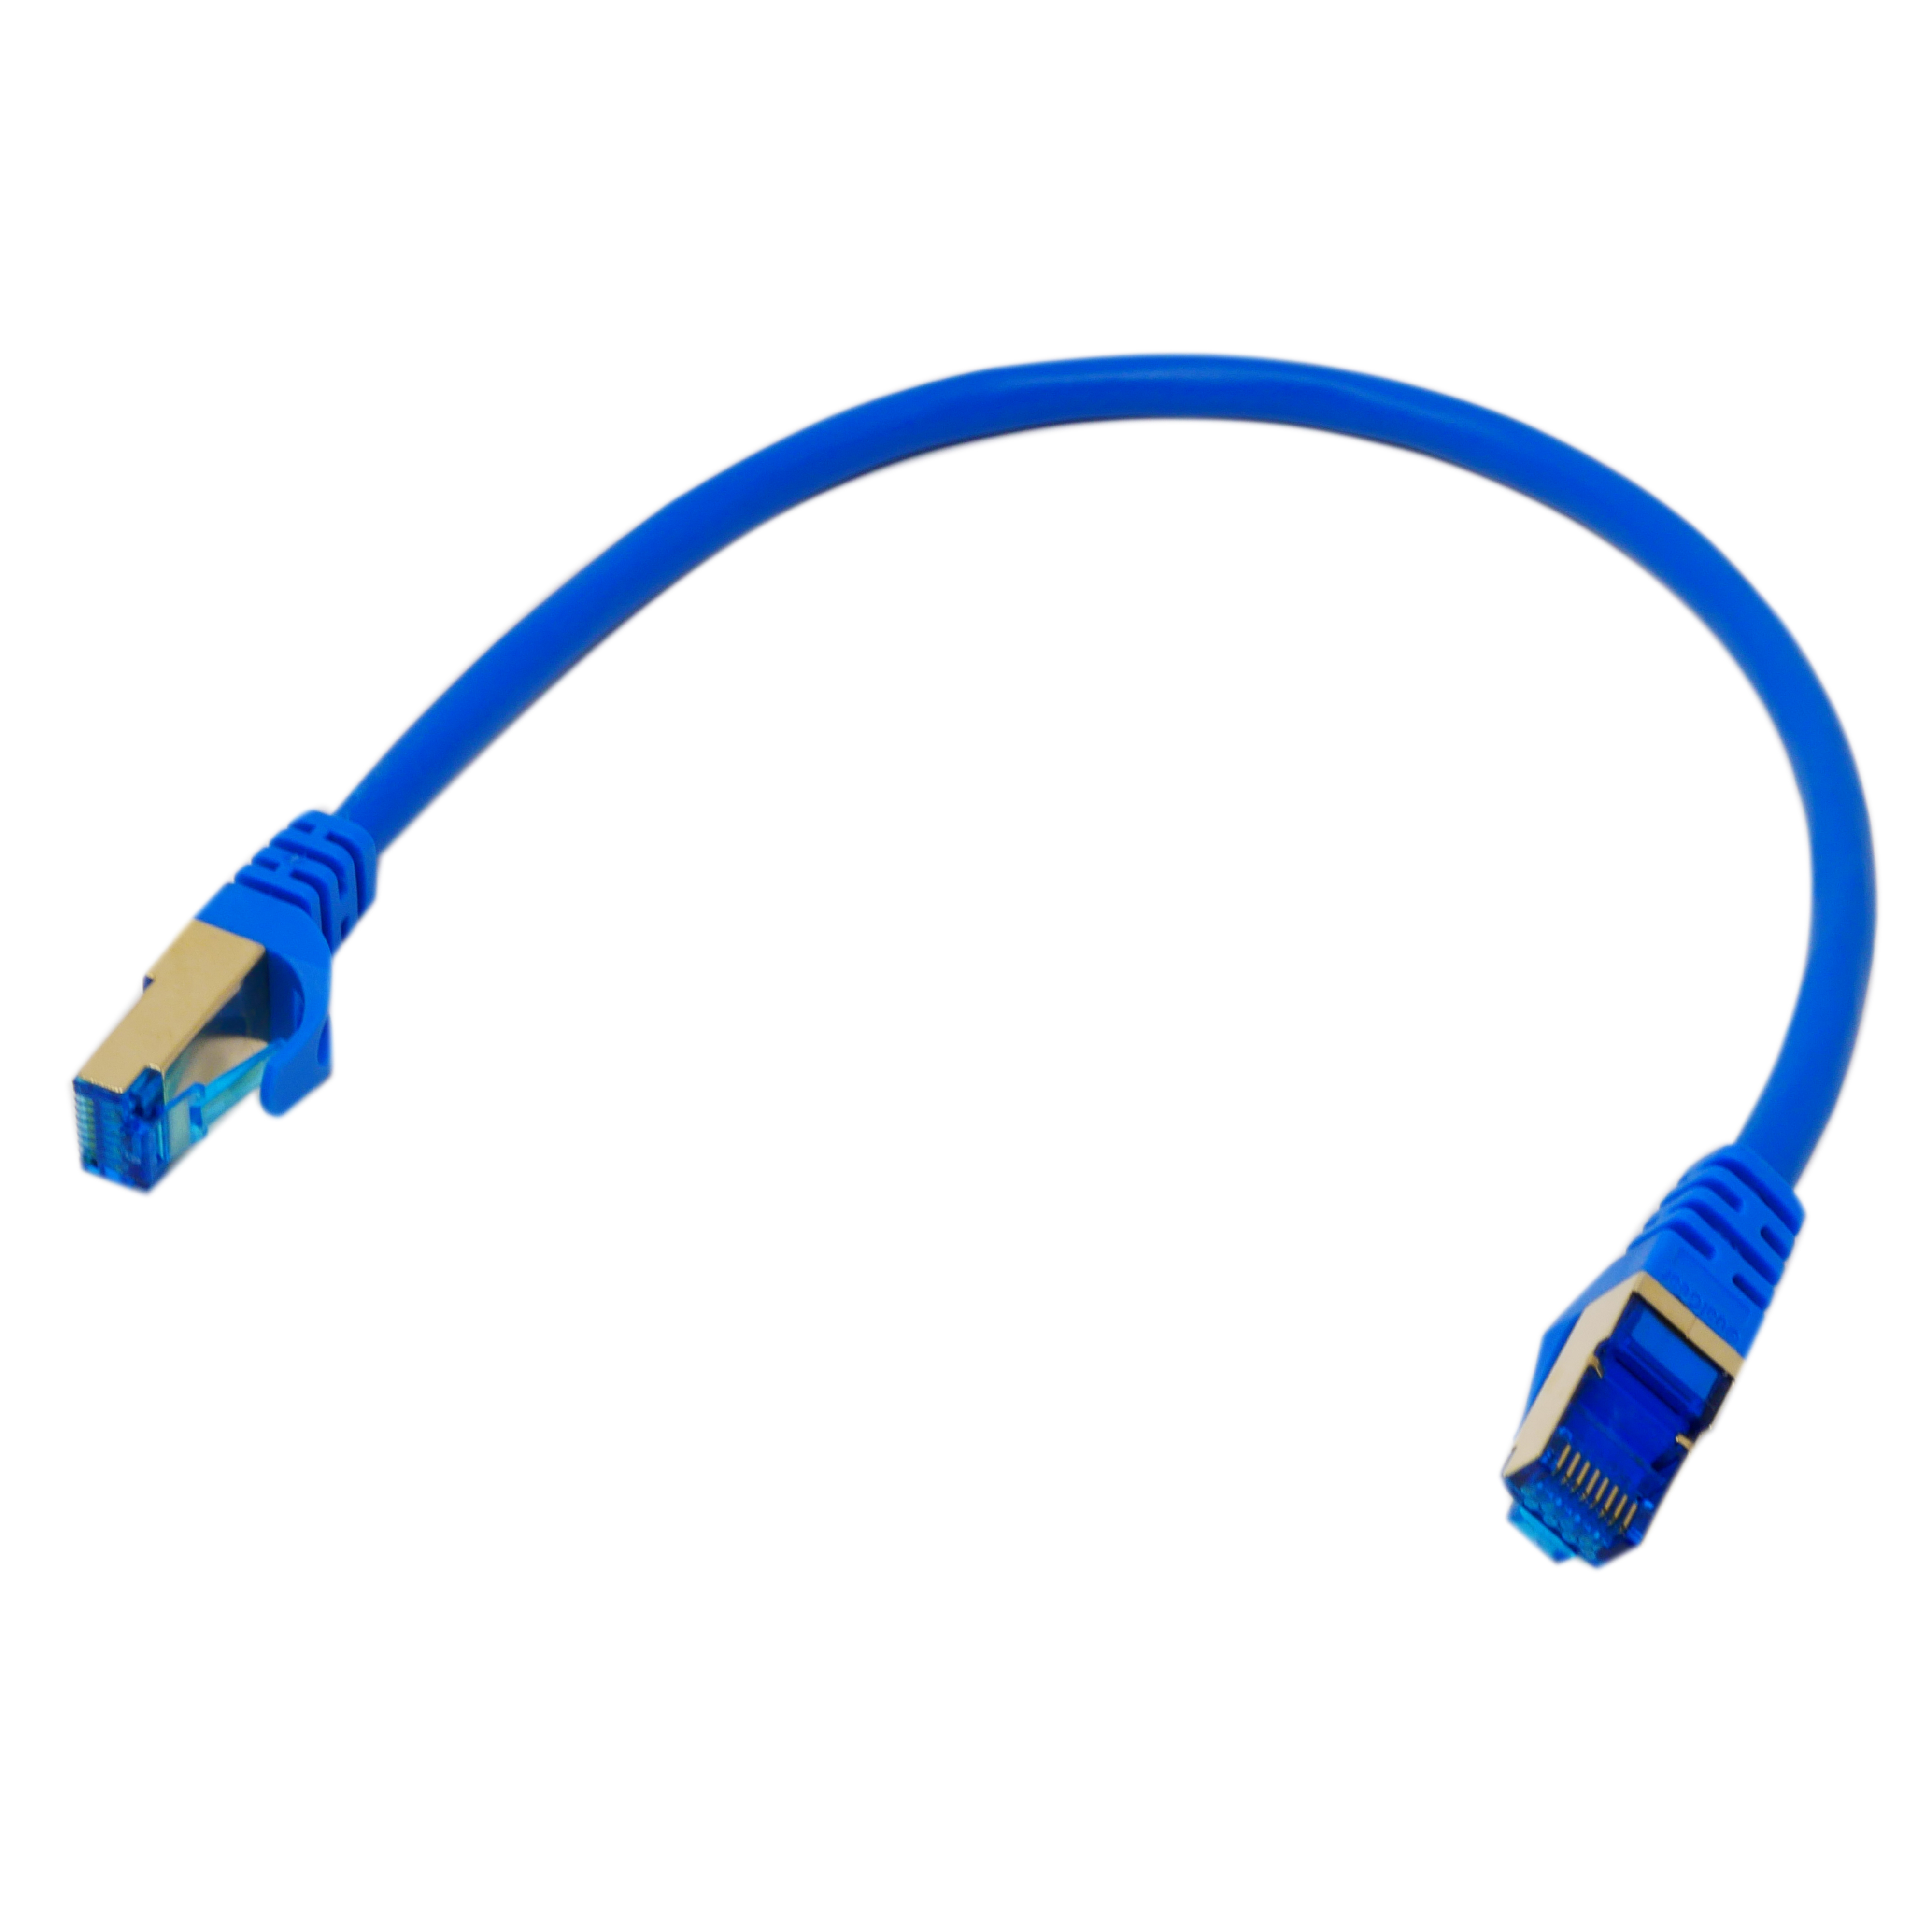 QualGear QG-CAT7R-1FT-BLU CAT 7 S/FTP Ethernet Cable Length 1 feet - 26 AWG, 10 Gbps, Gold Plated Contacts, RJ45, 99.99% OFC Copper, Color Blue 